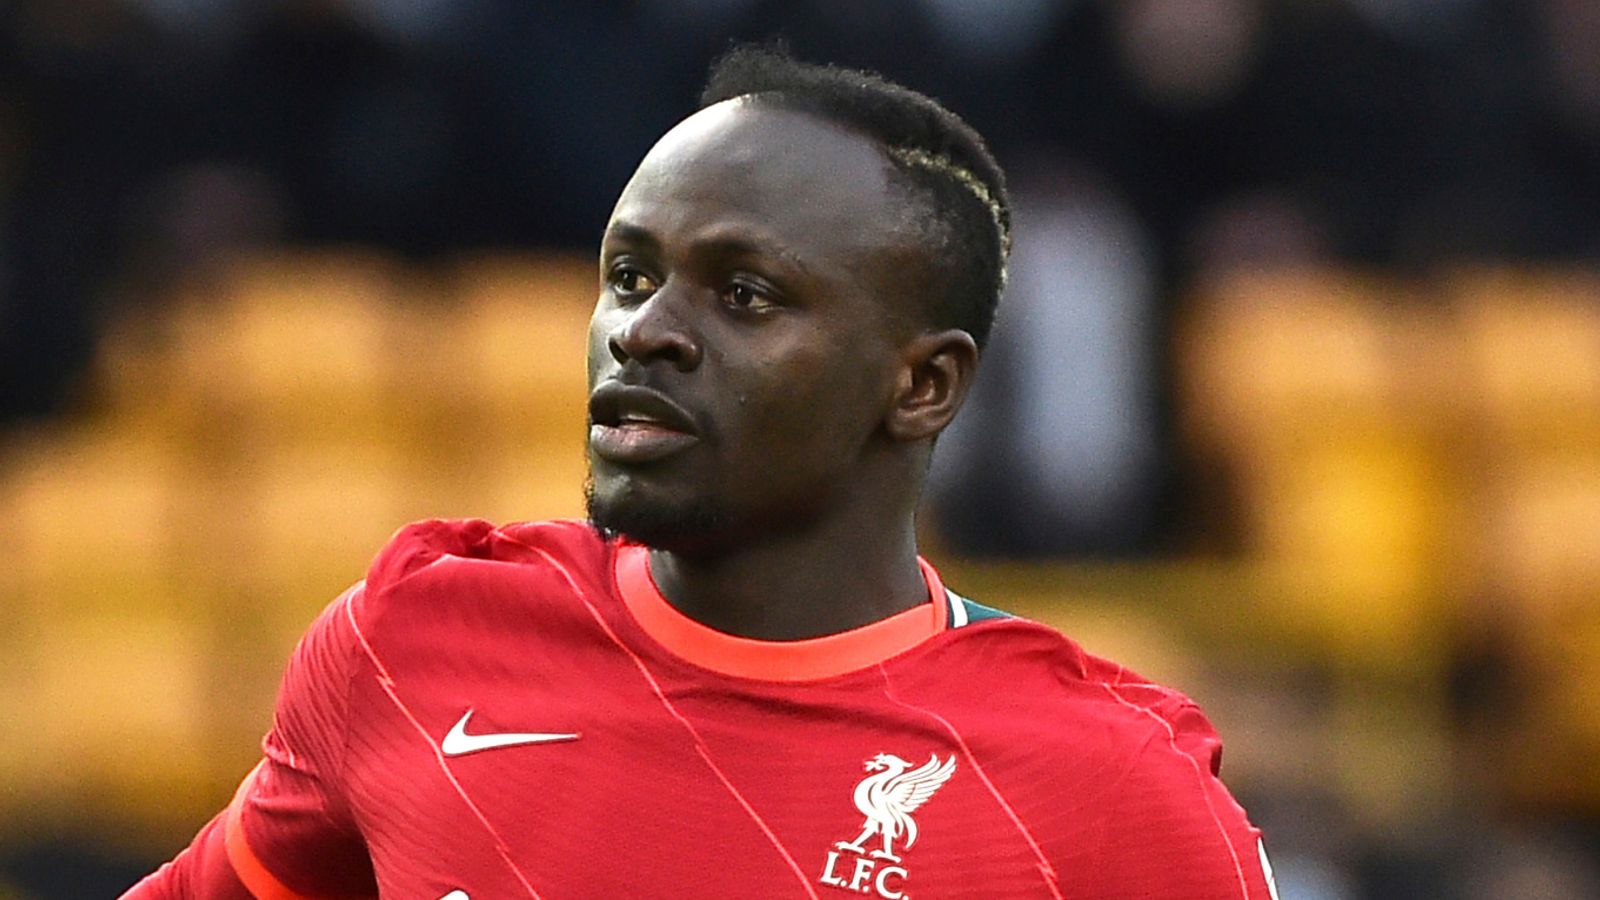 Sadio Mane, Ismaila Sarr and Kalidou Koulibaly named in Senegal squad for Africa Cup of Nations